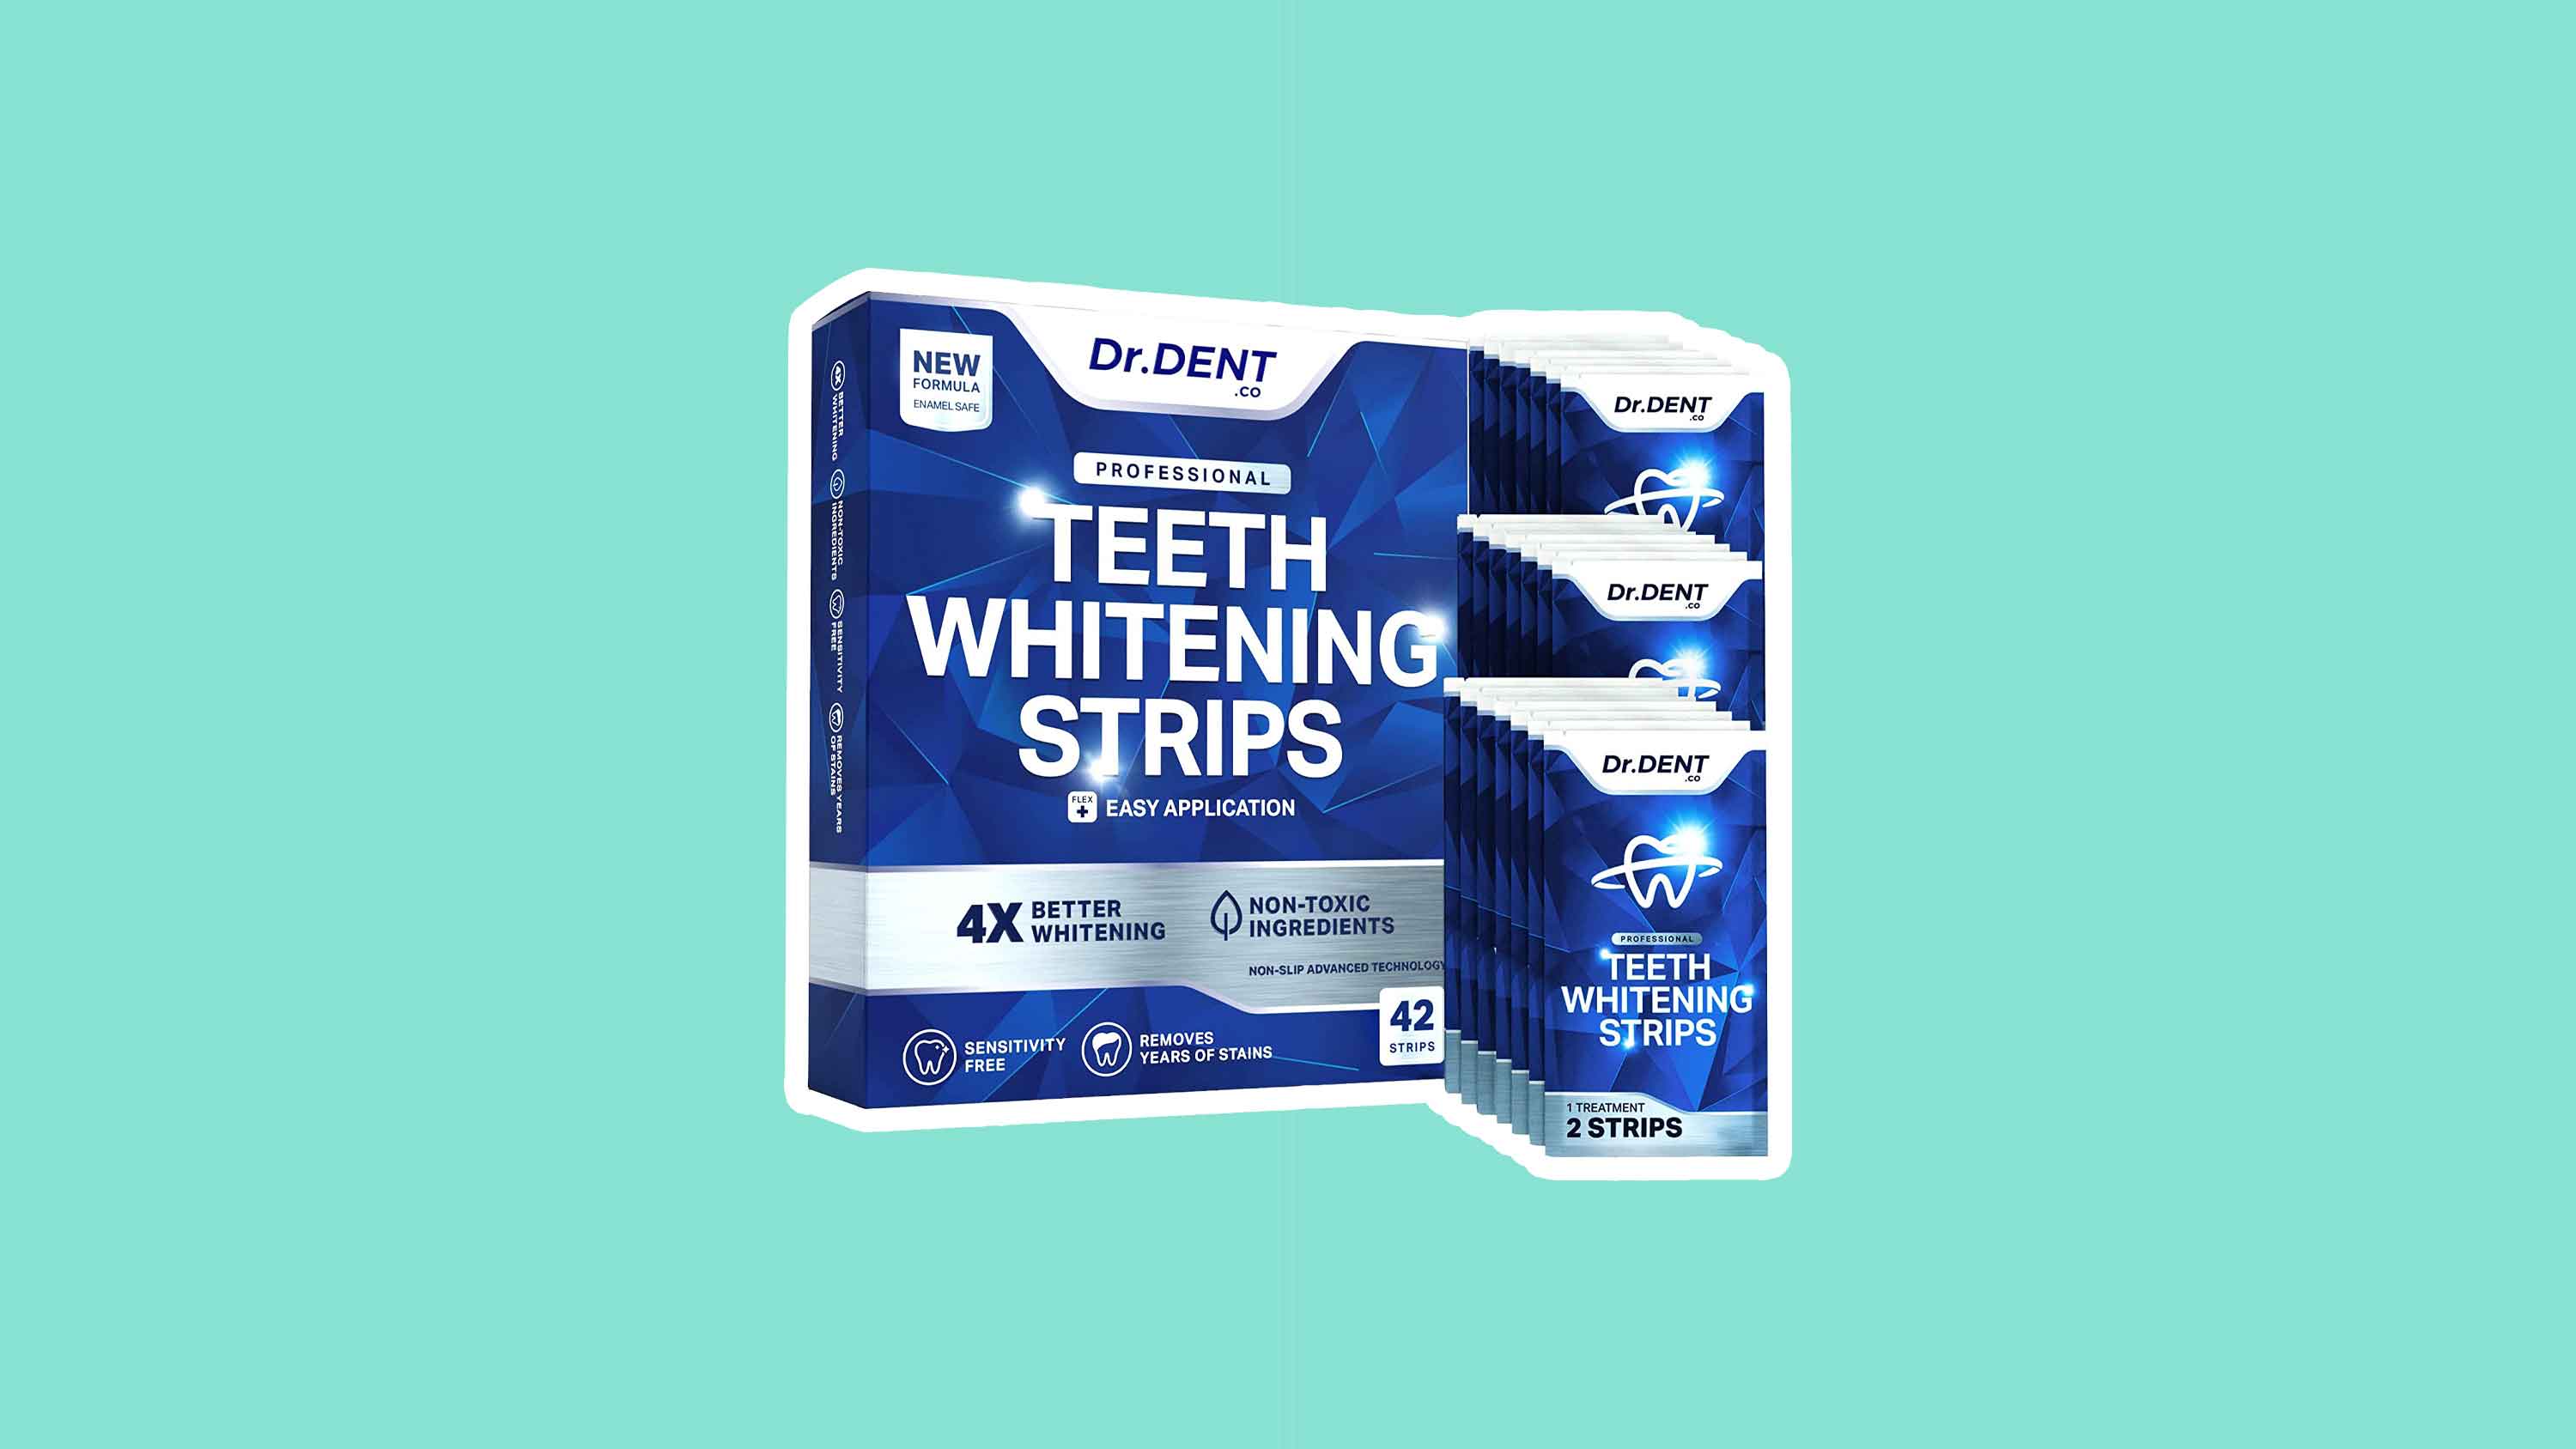 Want a brighter smile? Shop this Amazon deal on professional whitening teeth strips